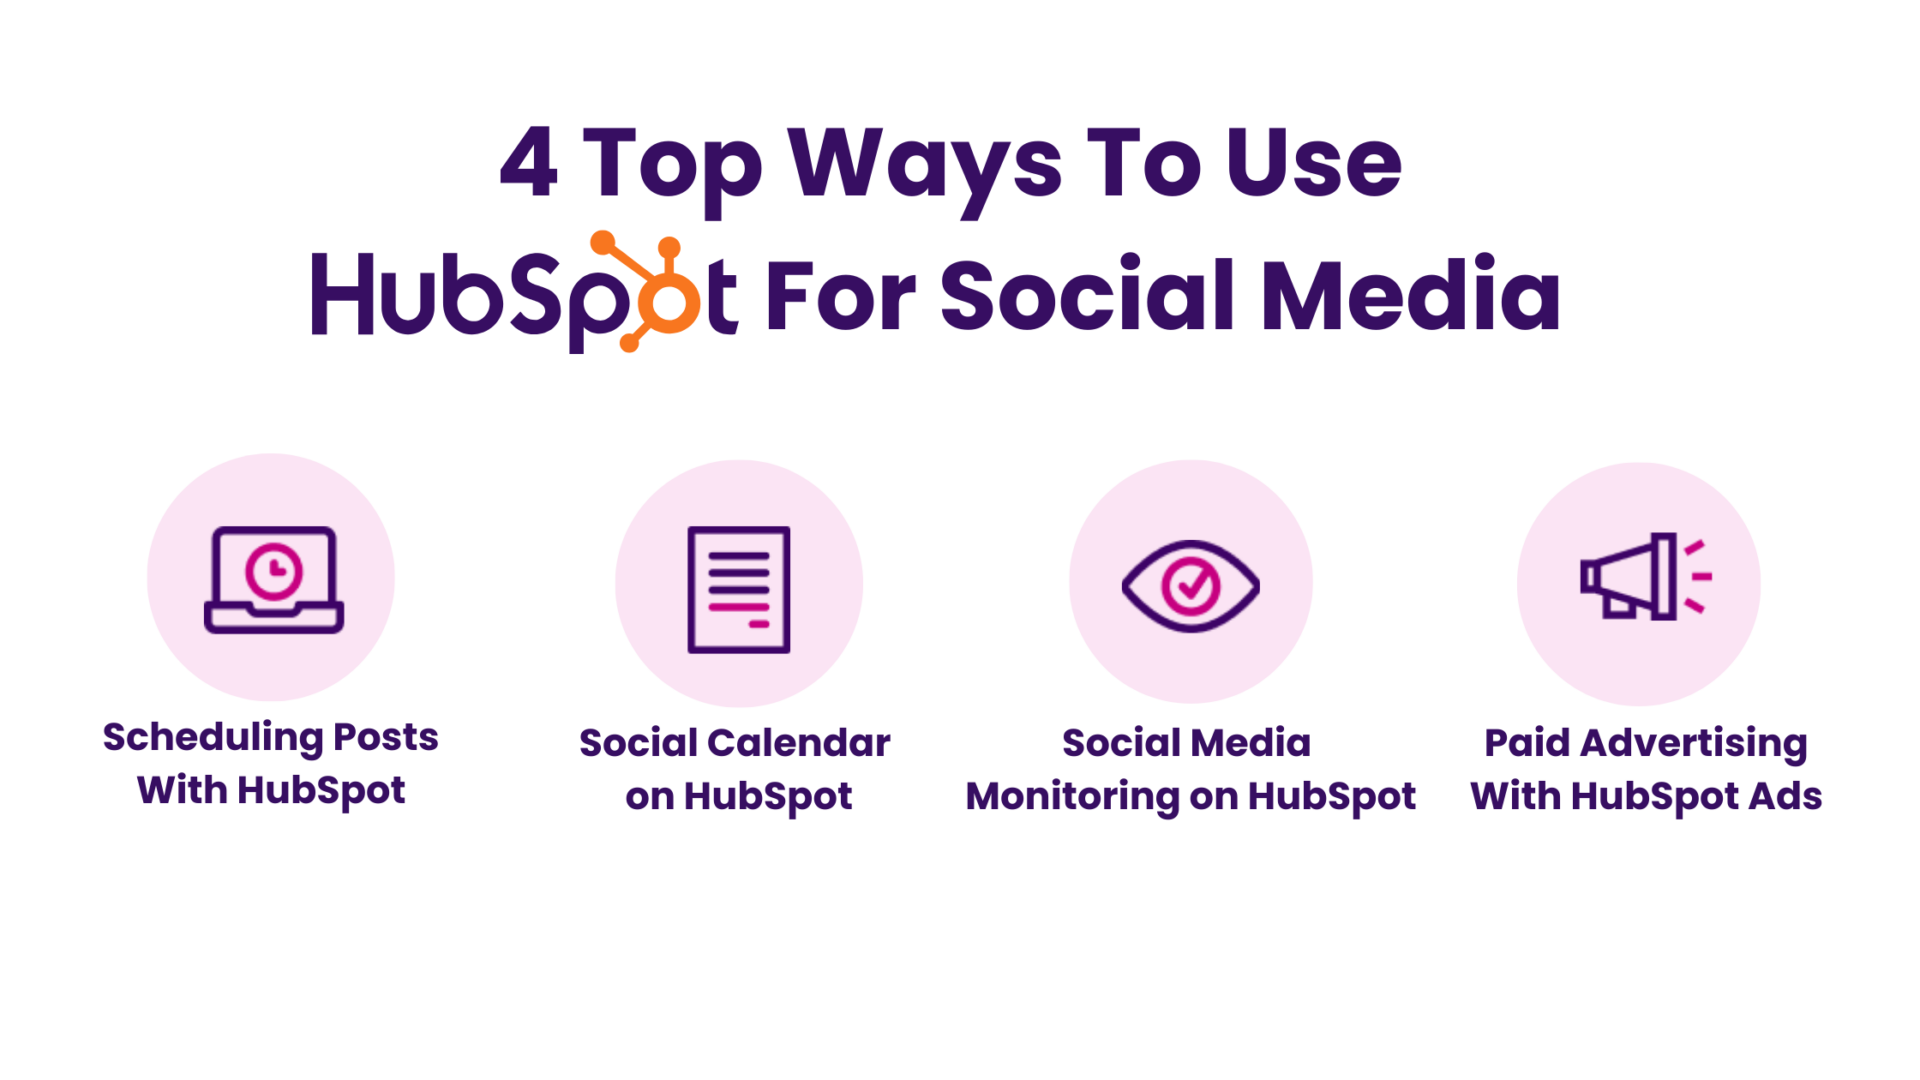 4 Top Ways To Use HubSpot For Social Media